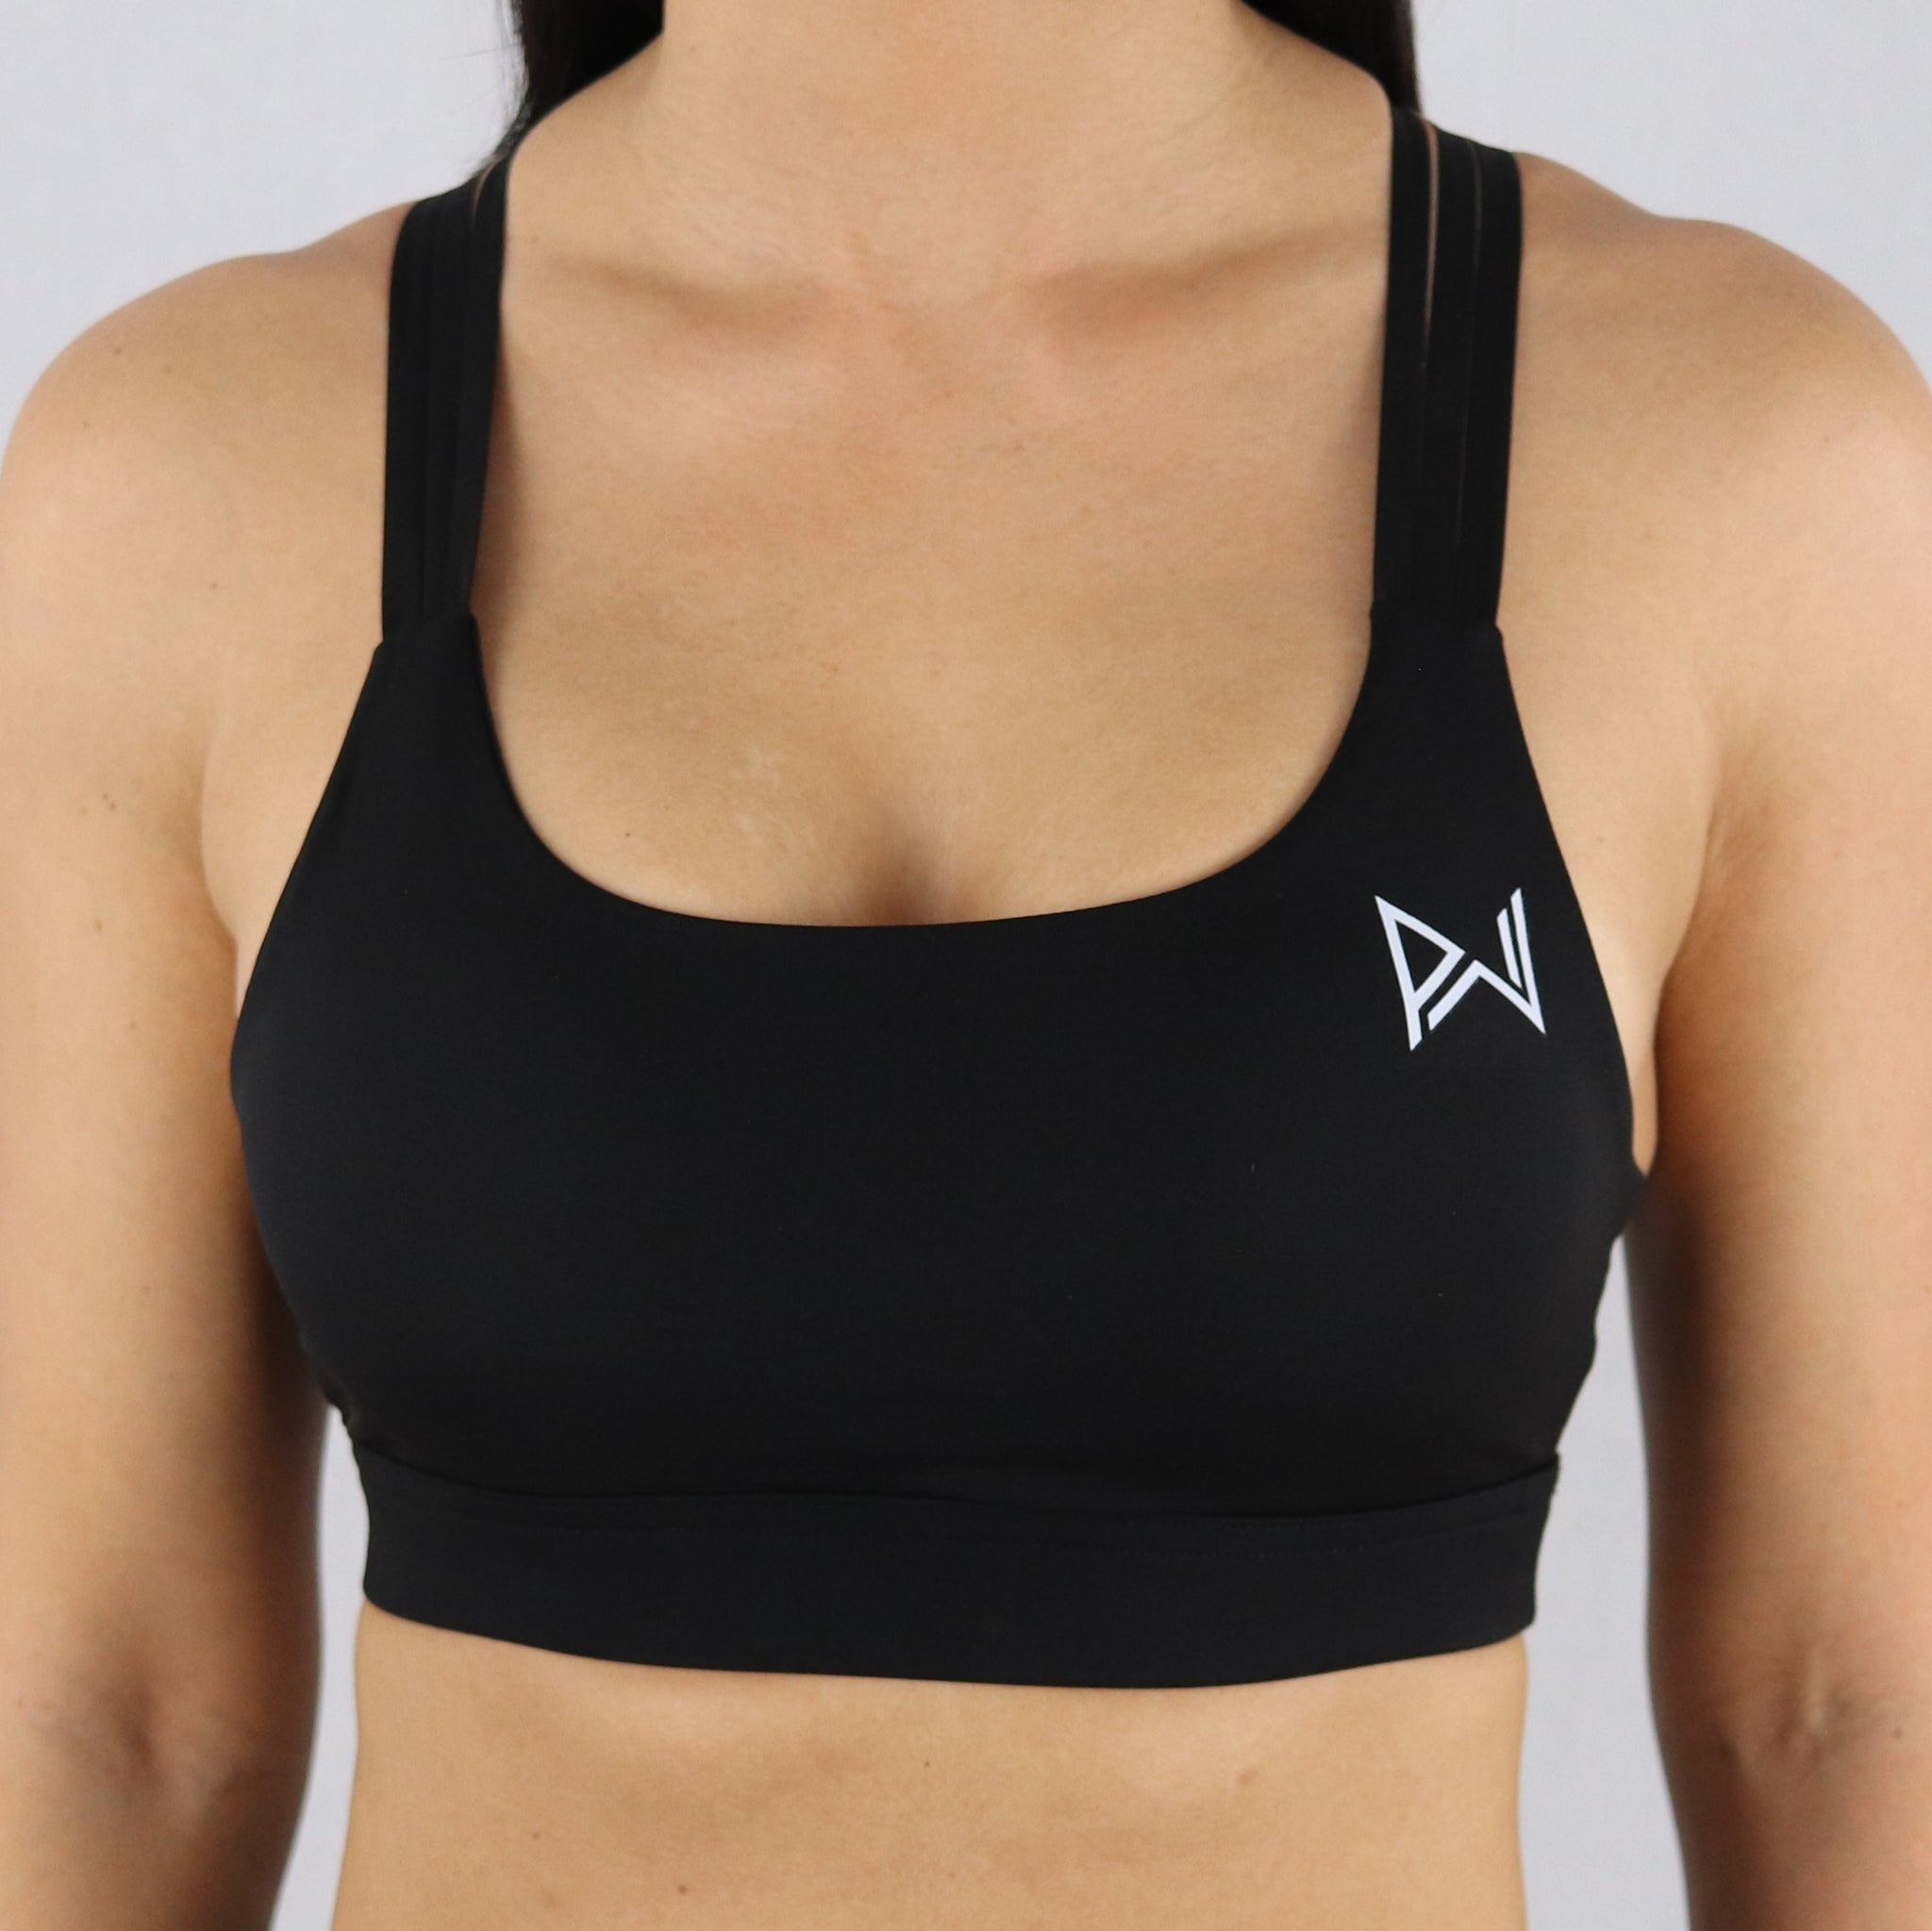 Ideology NWT Crisscrossed Black Sports Bra Gray Sz Large - $5 New With Tags  - From Krista